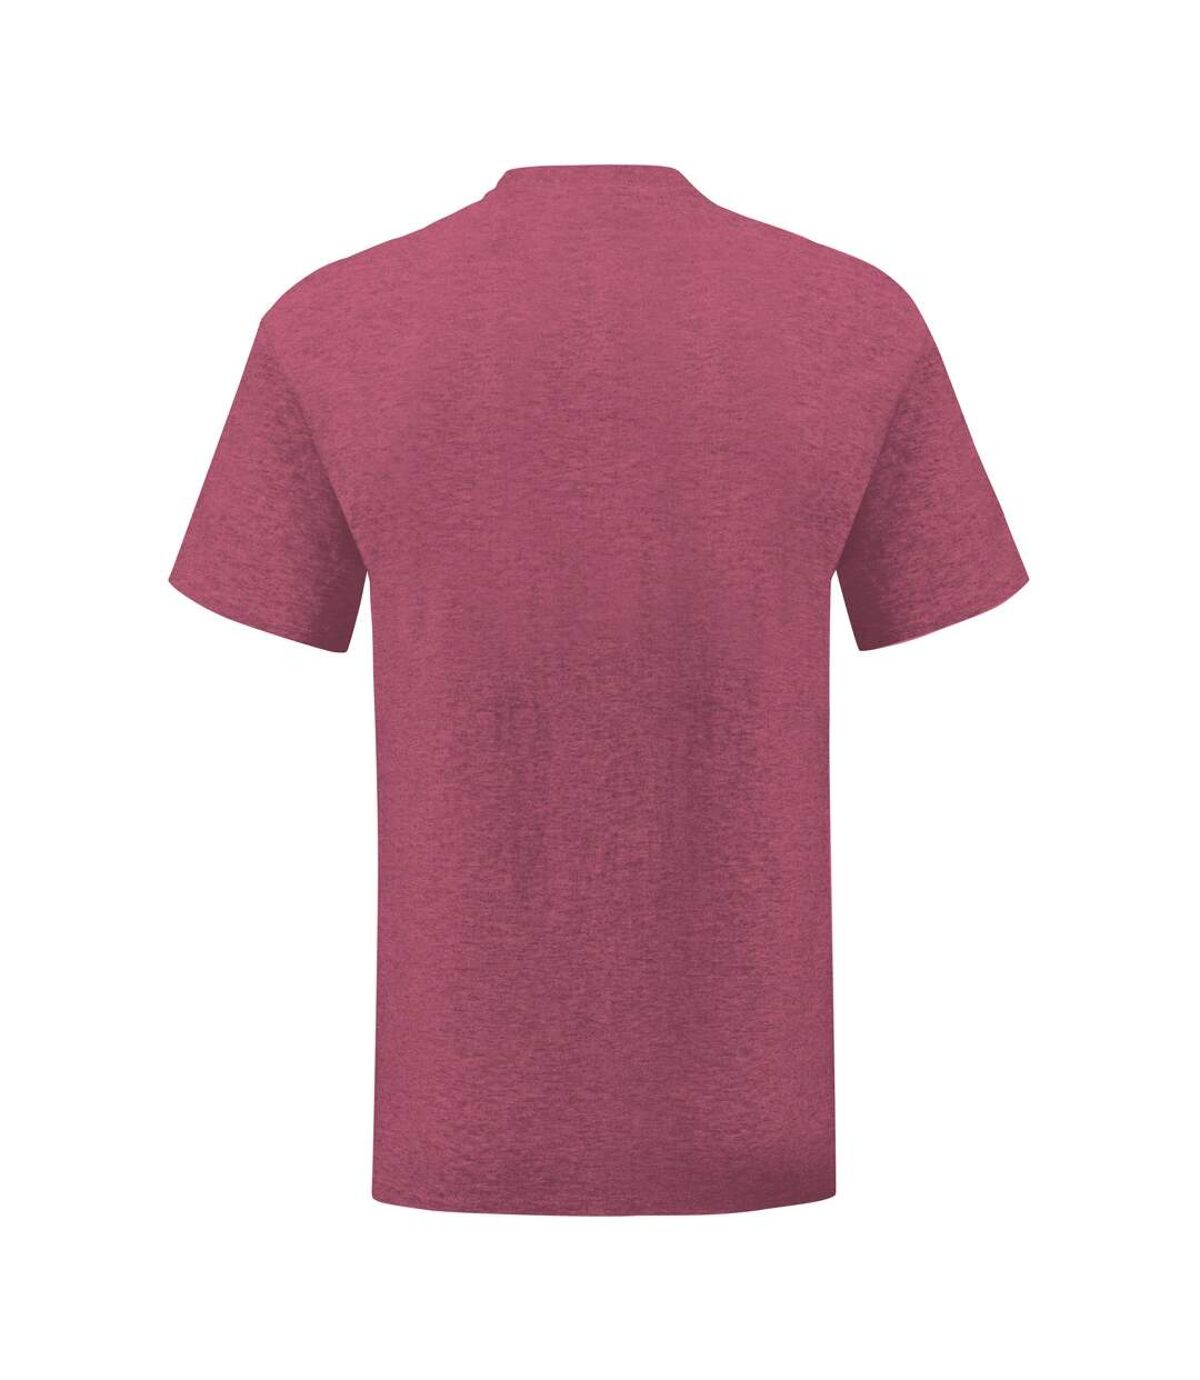 Fruit Of The Loom Mens Iconic T-Shirt (Pack of 5) (Heather Burgundy)